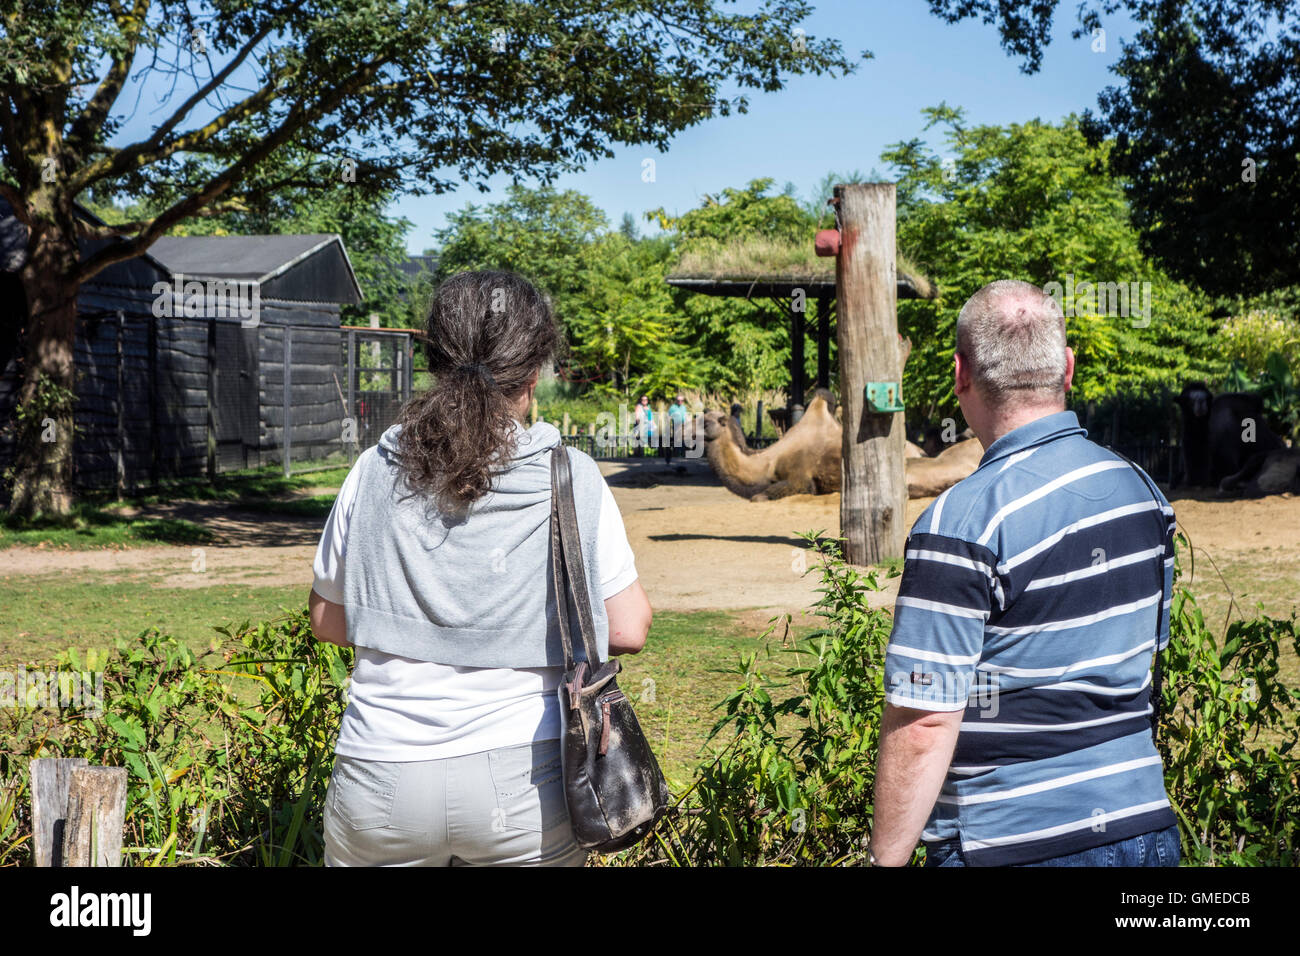 Visitors looking at camels in the camel enclosure at the Planckendael Zoo, Belgium Stock Photo